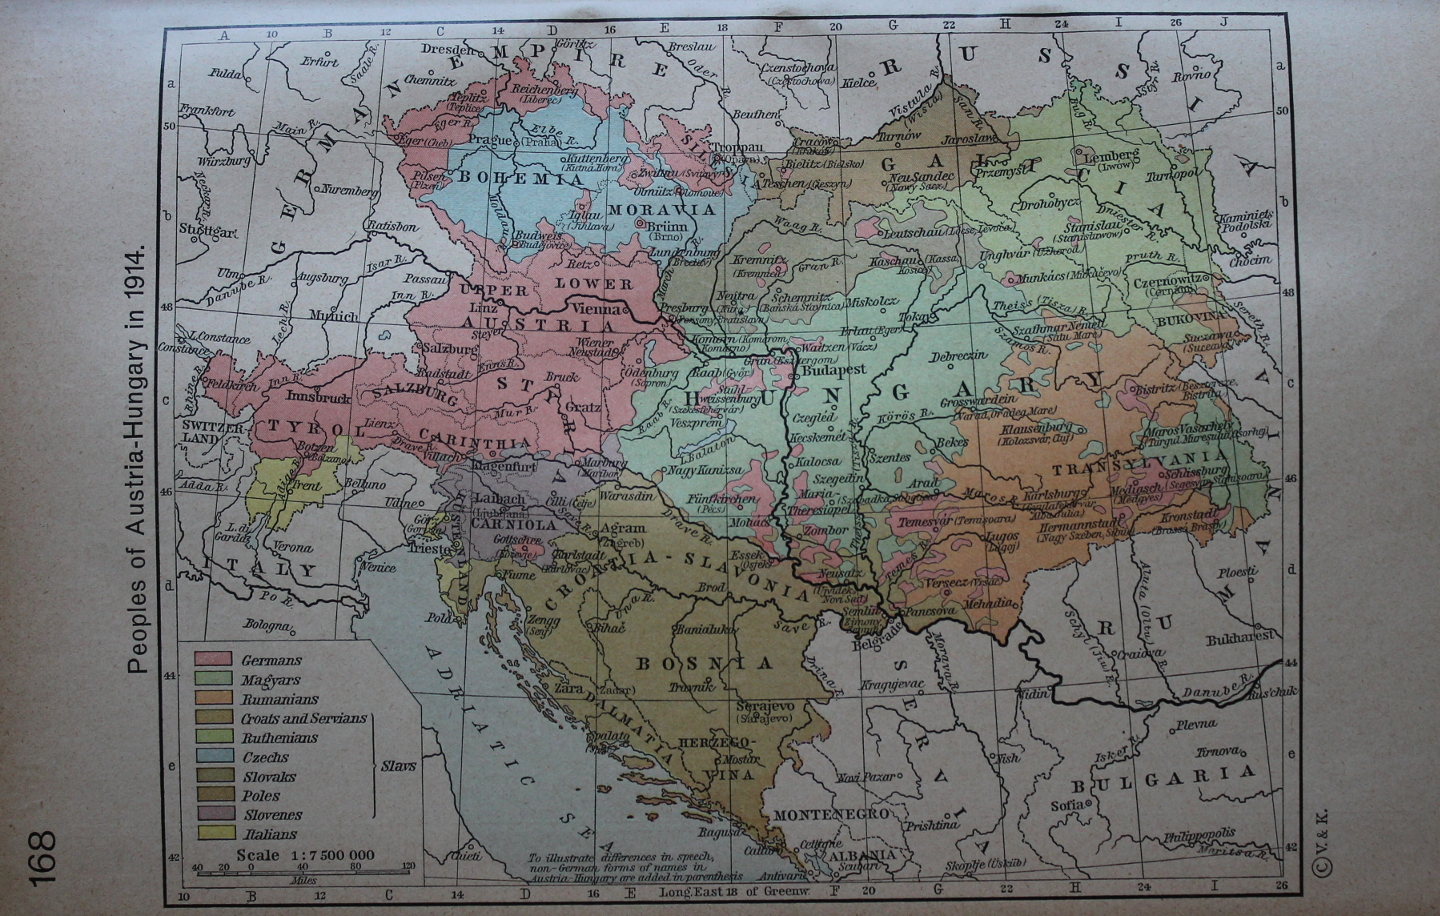 Peoples of Austria-Hungary in 1914 from 'Historical Altas' by William R. Shepherd. The empire's population included Germans, Magyars, Romanians, Italians, and Slavs including Croats, Serbians, Ruthenians, Czechs, Slovaks, Poles, and Slovenes.